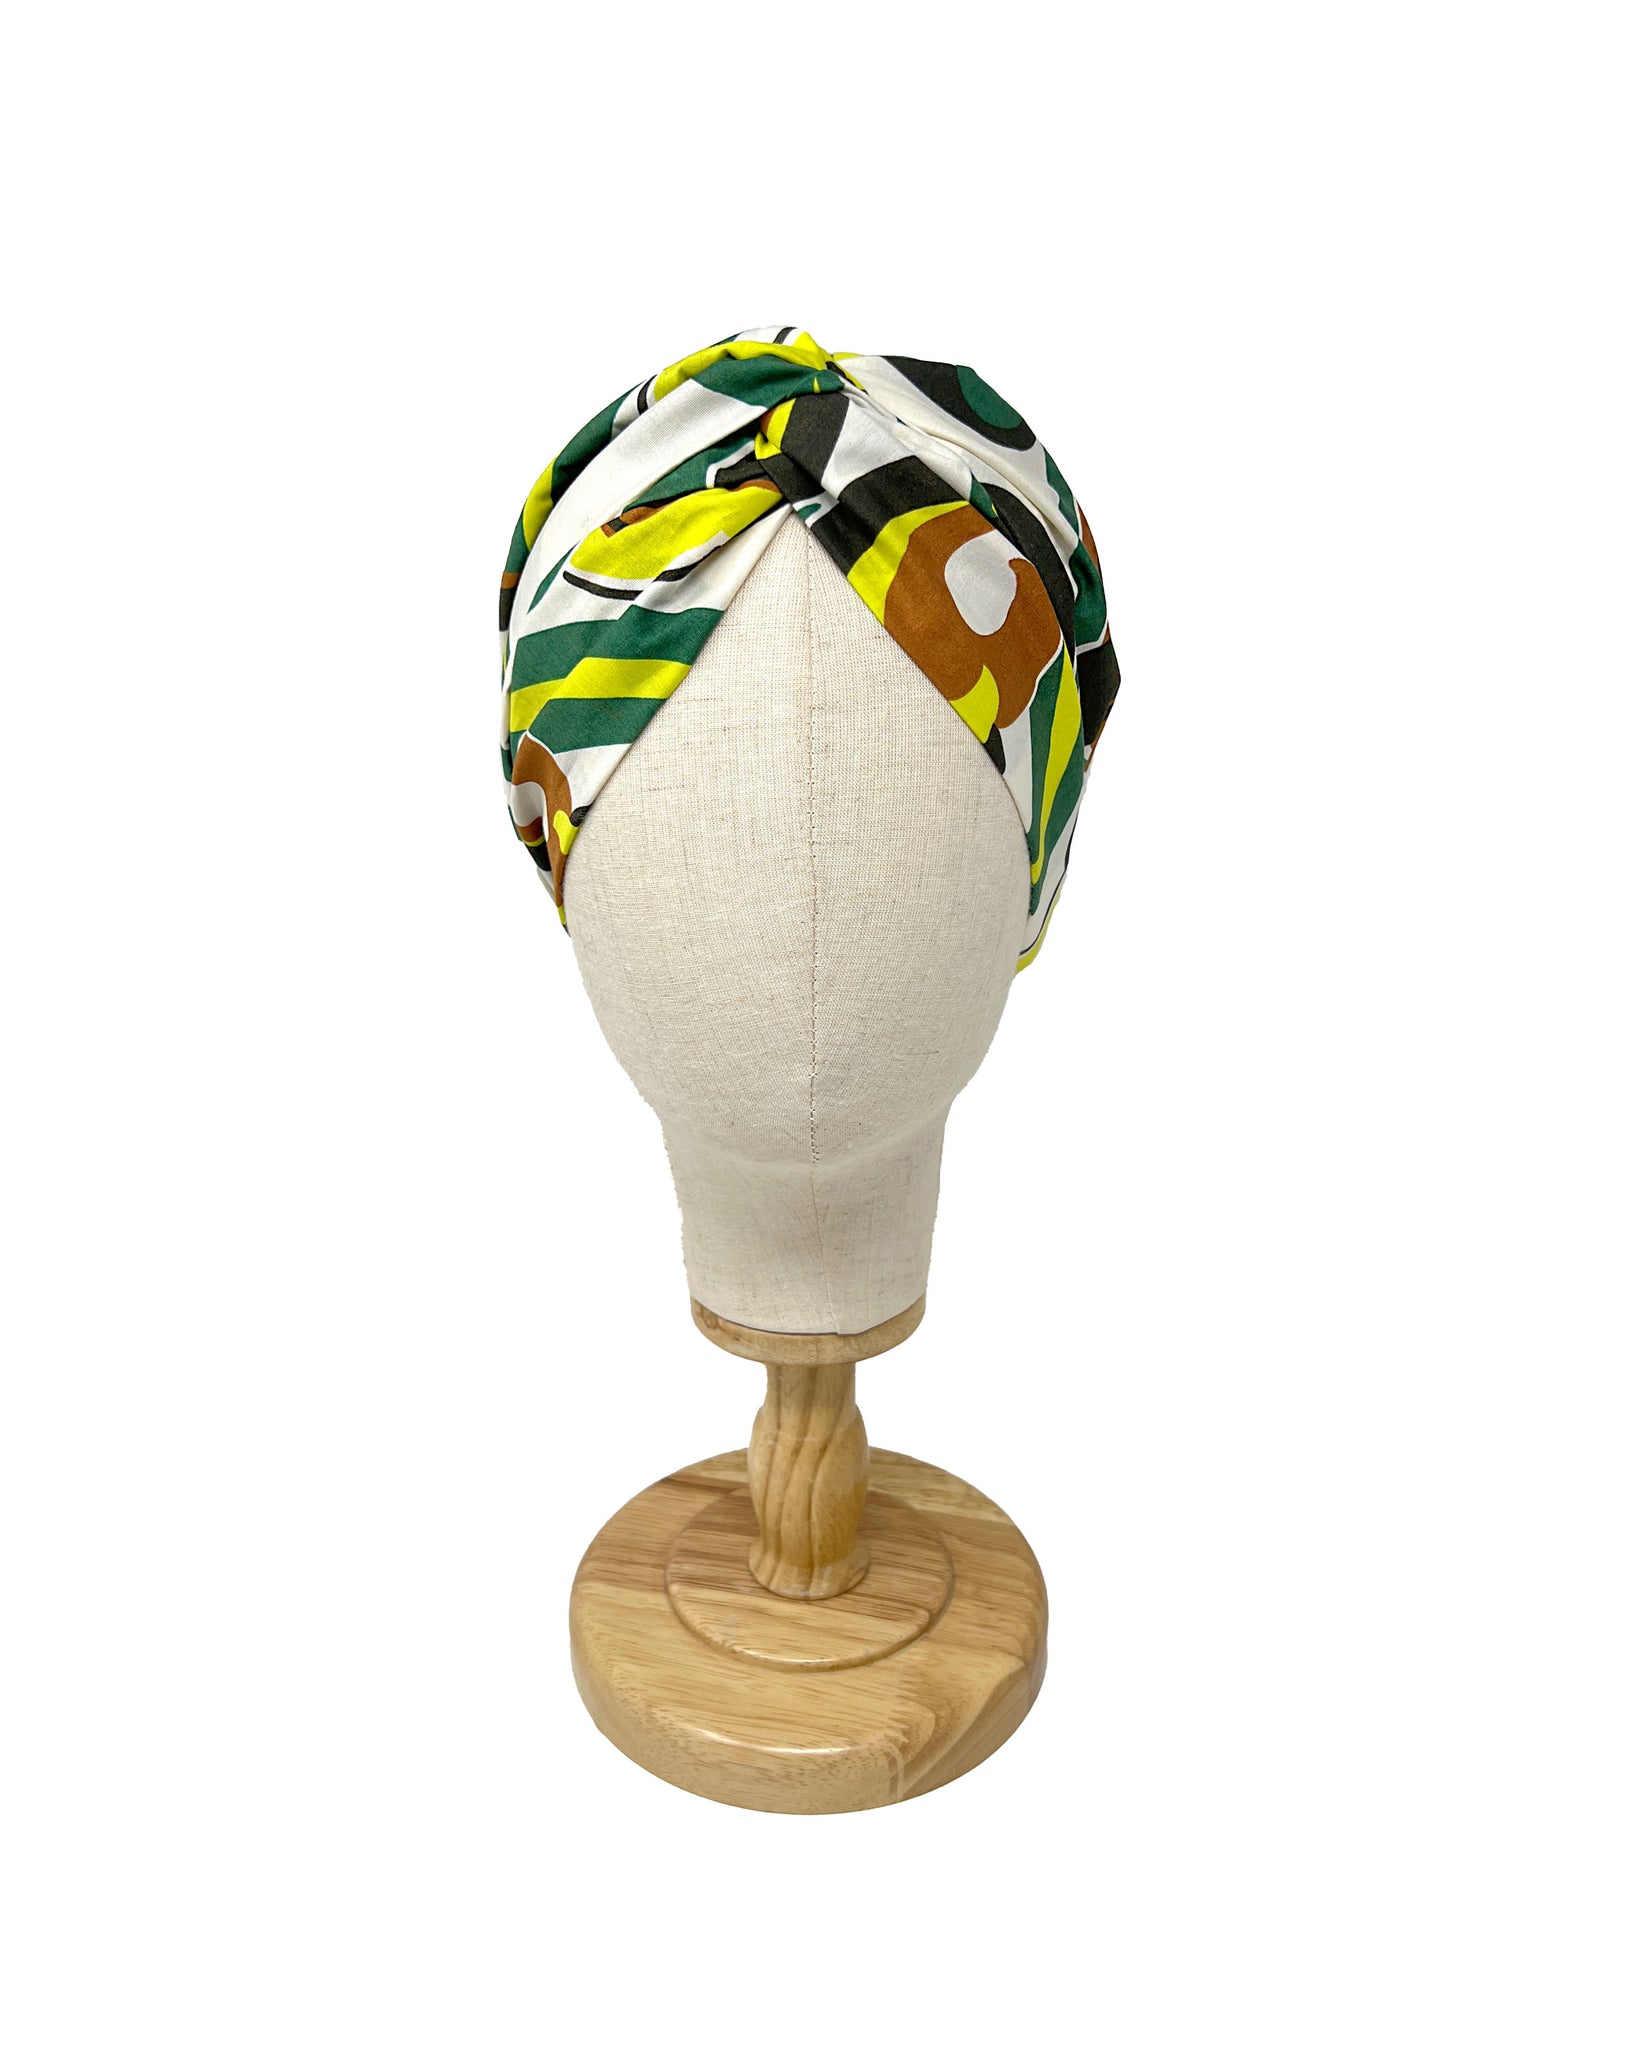 White cotton headband with yellow green and brown cashmere pattern